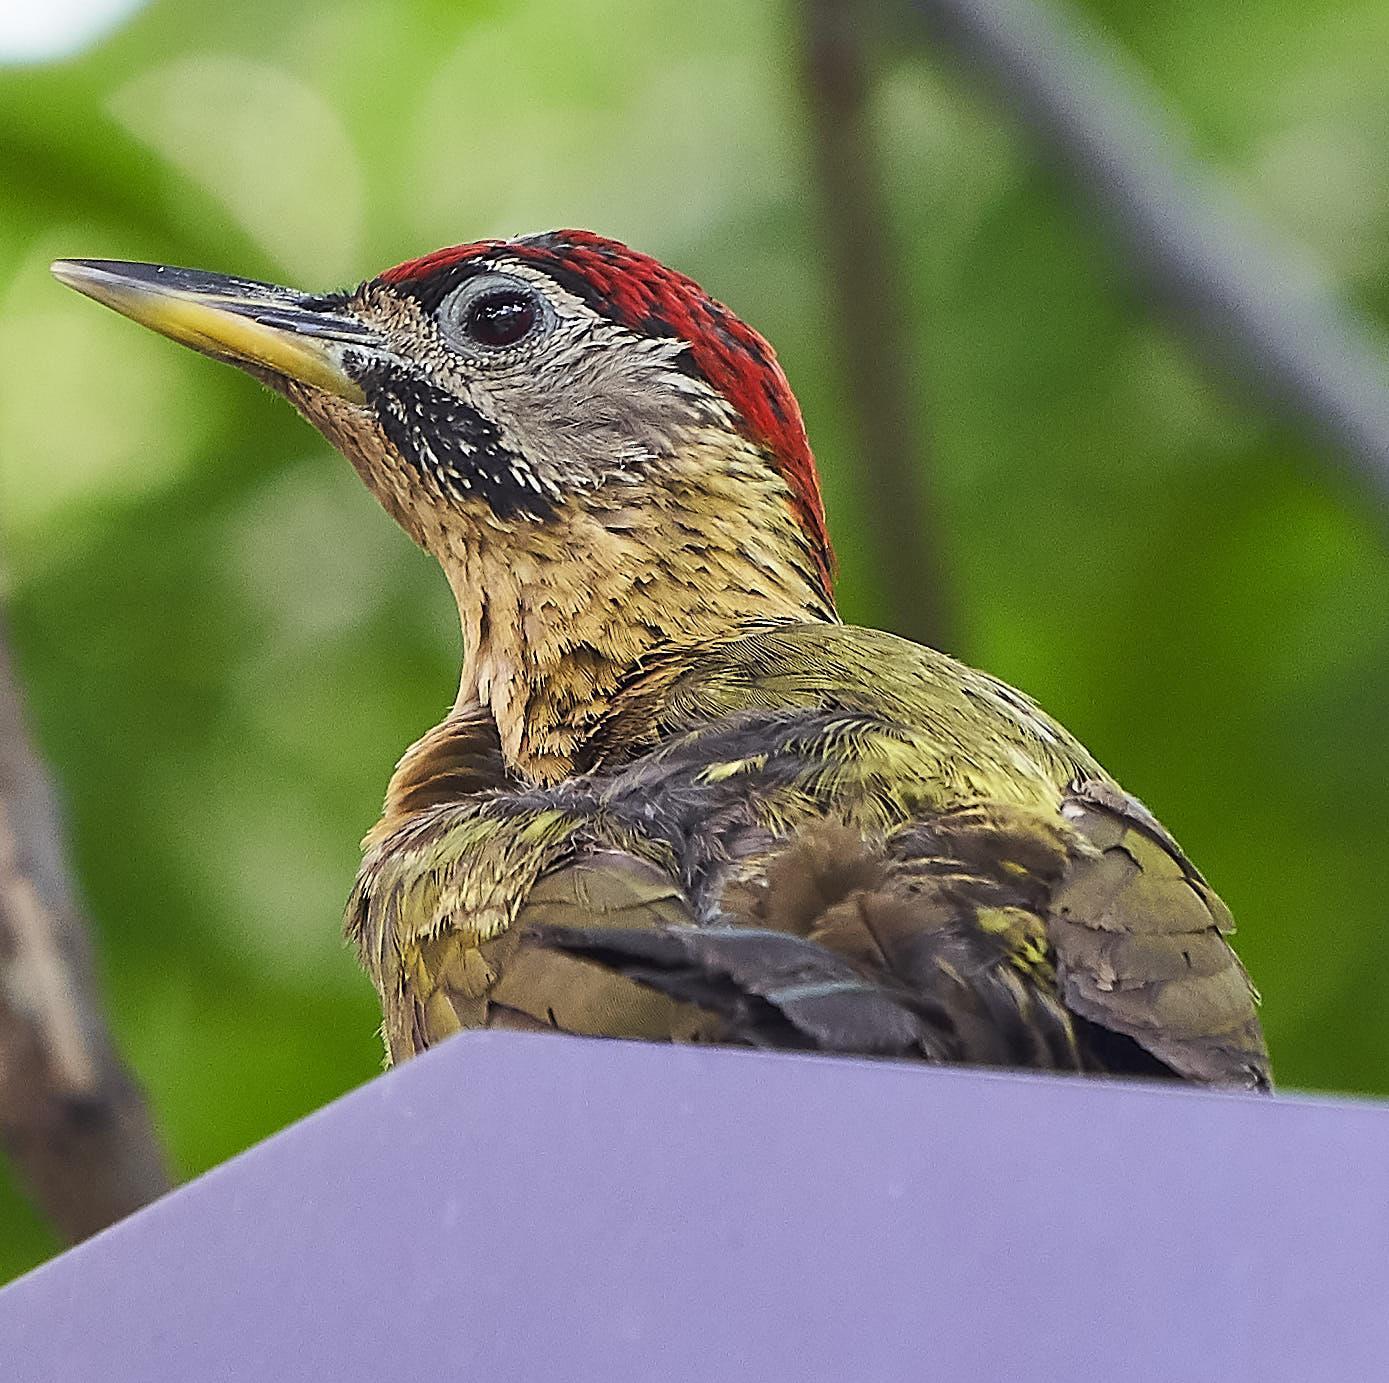 Laced Woodpecker Photo by Steven Cheong